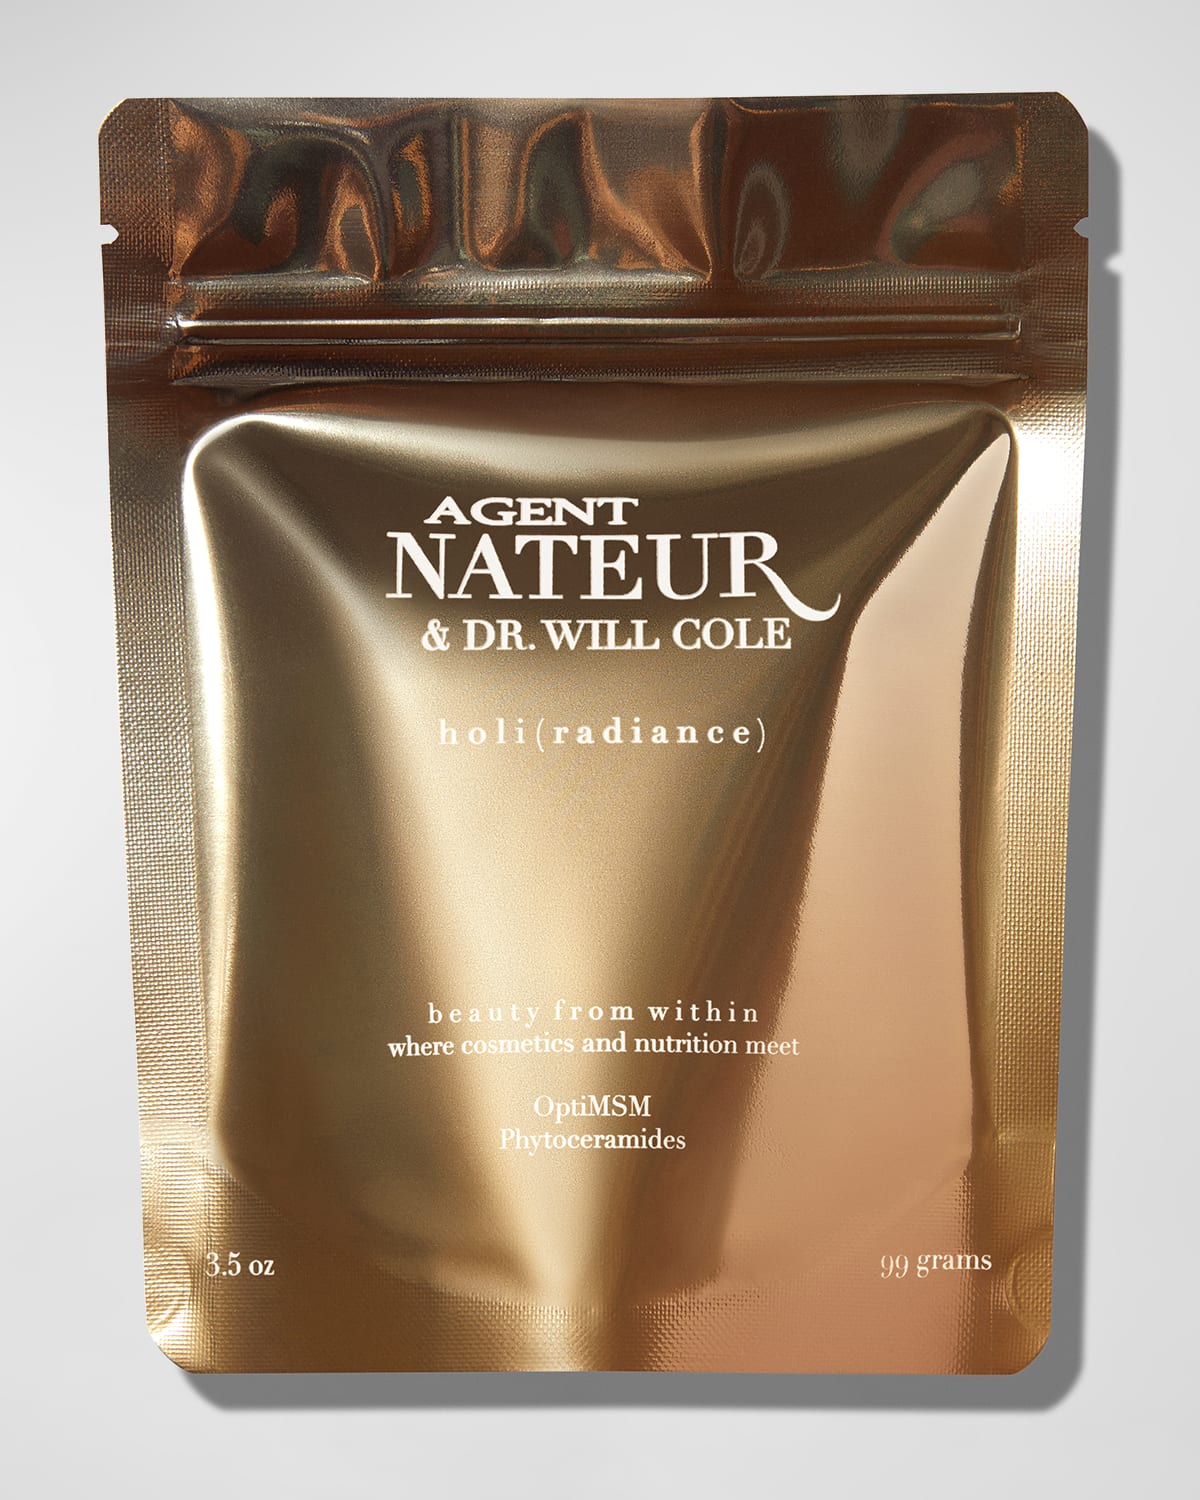 Agent Nateur Holi Radiance Beauty From Within, 3.5 oz.